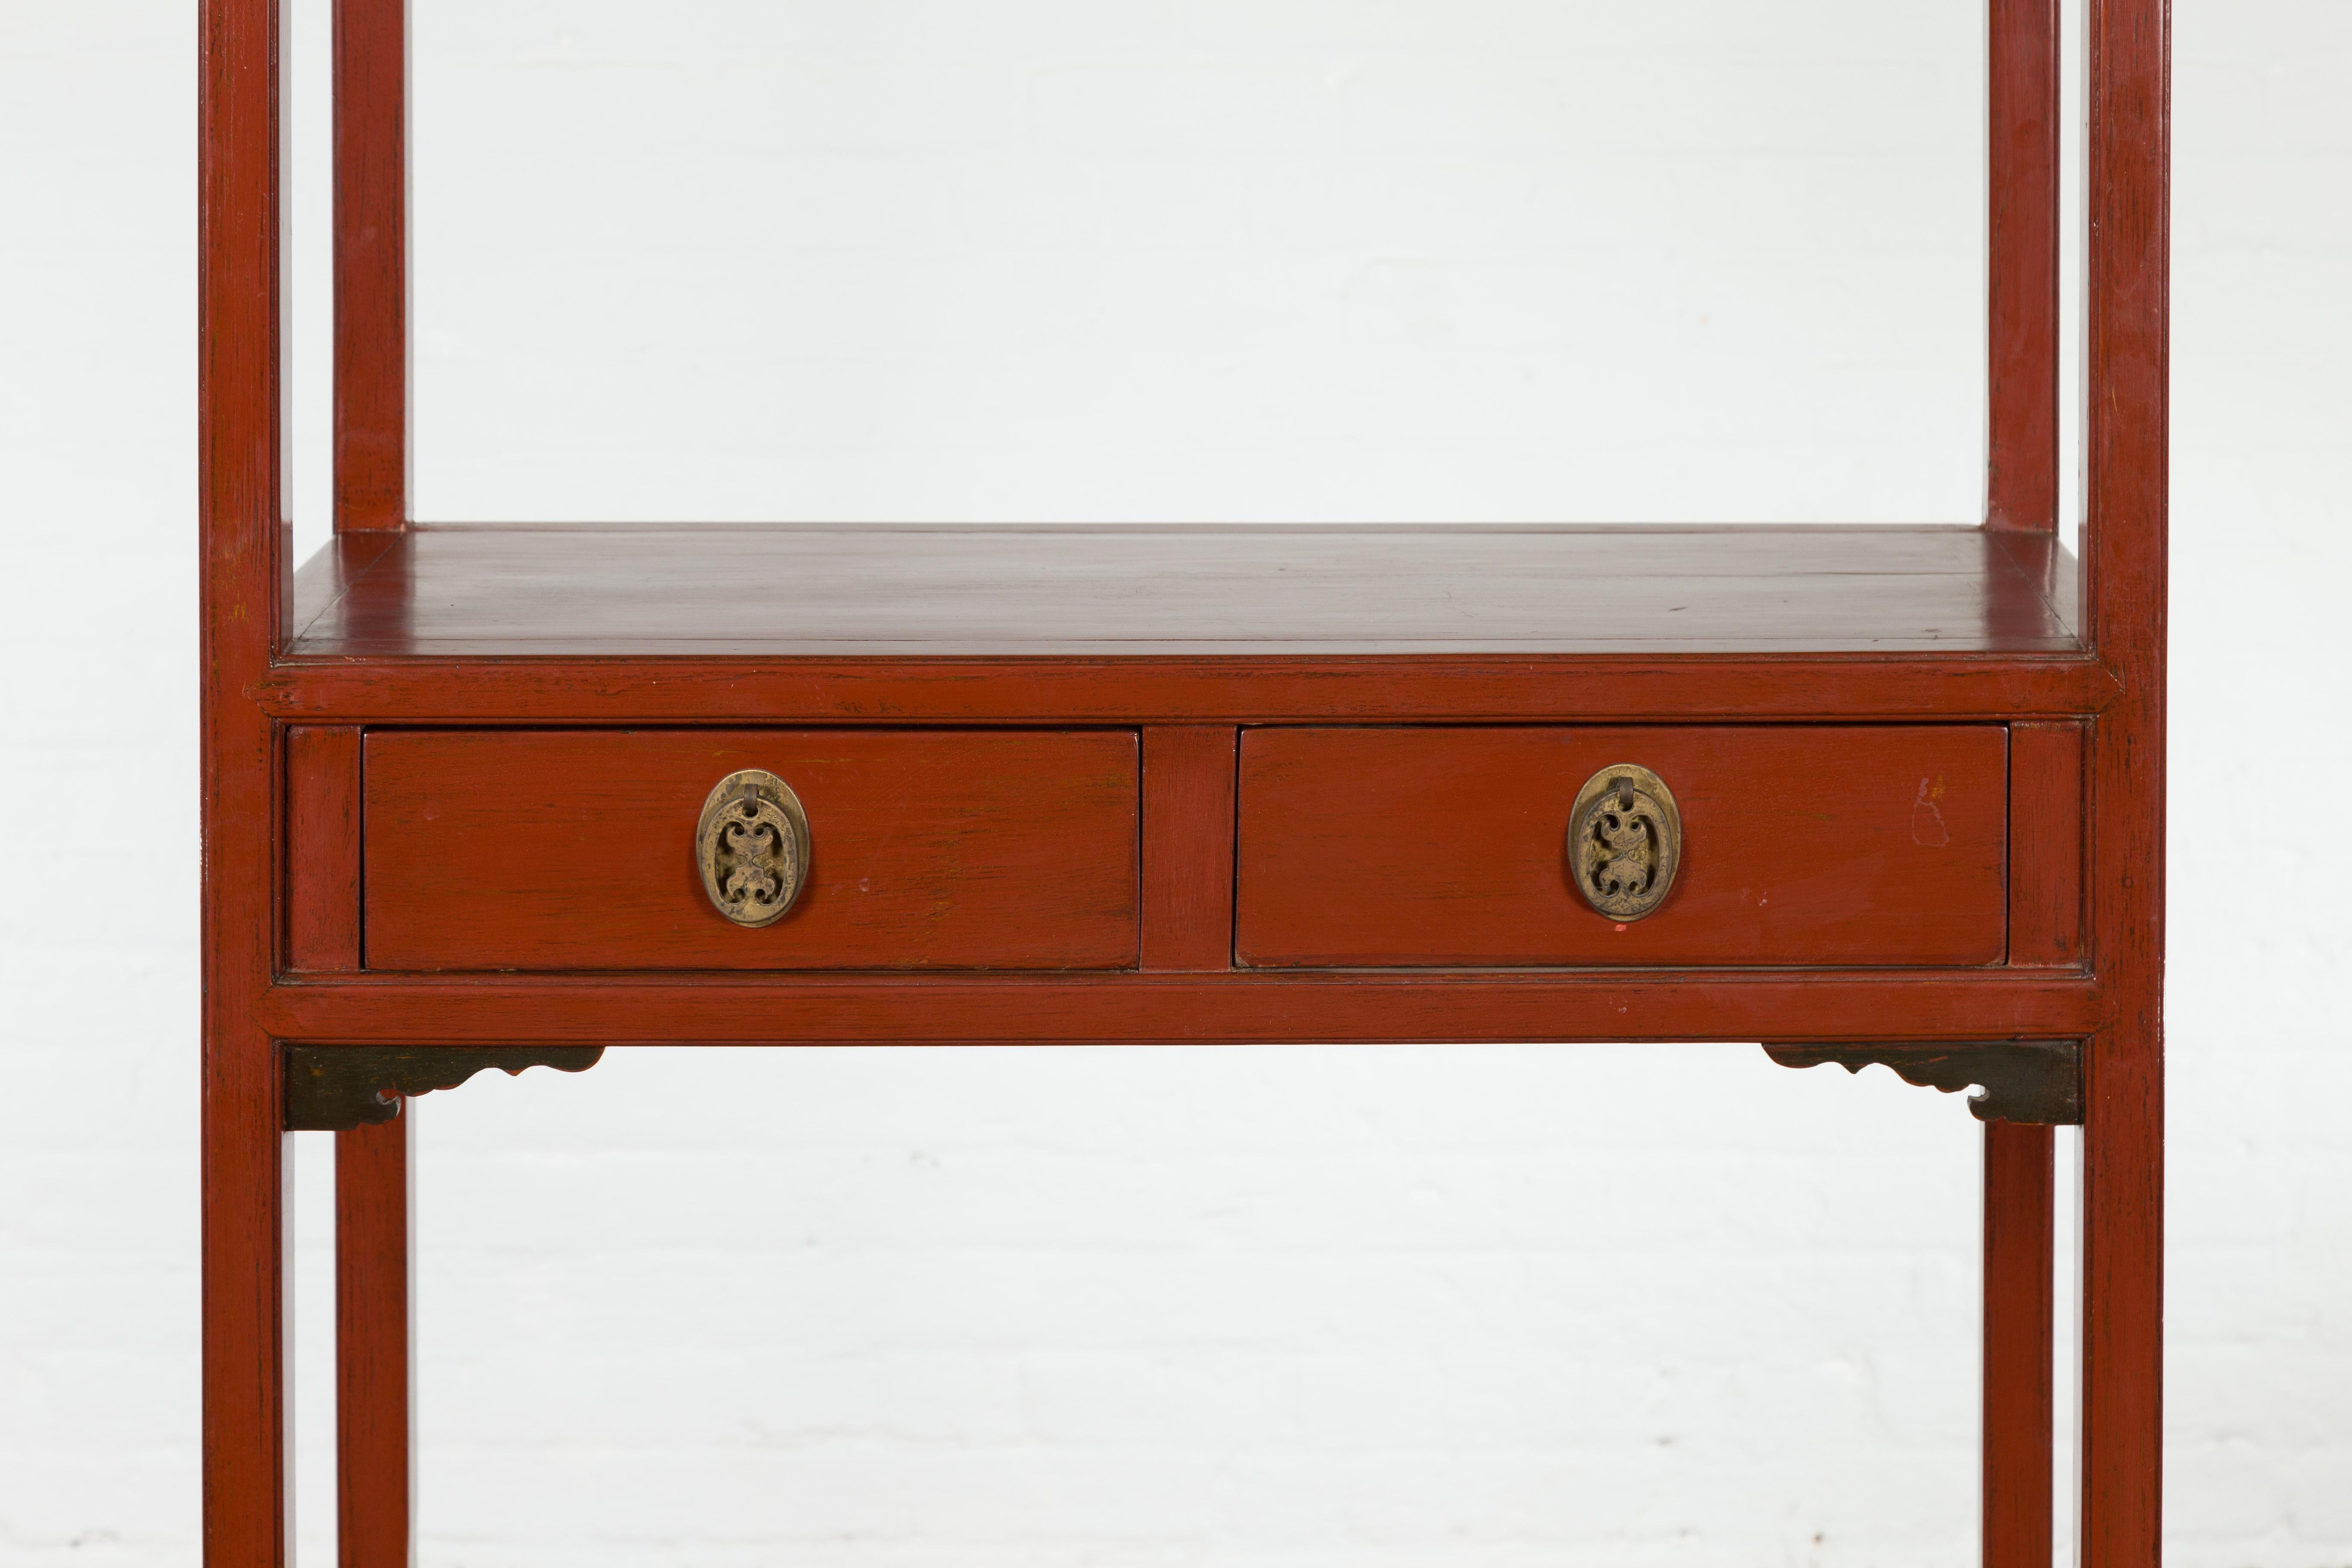 Late Qing Dynasty Red Open Bookshelf with Drawers and Fretwork Shelf For Sale 2